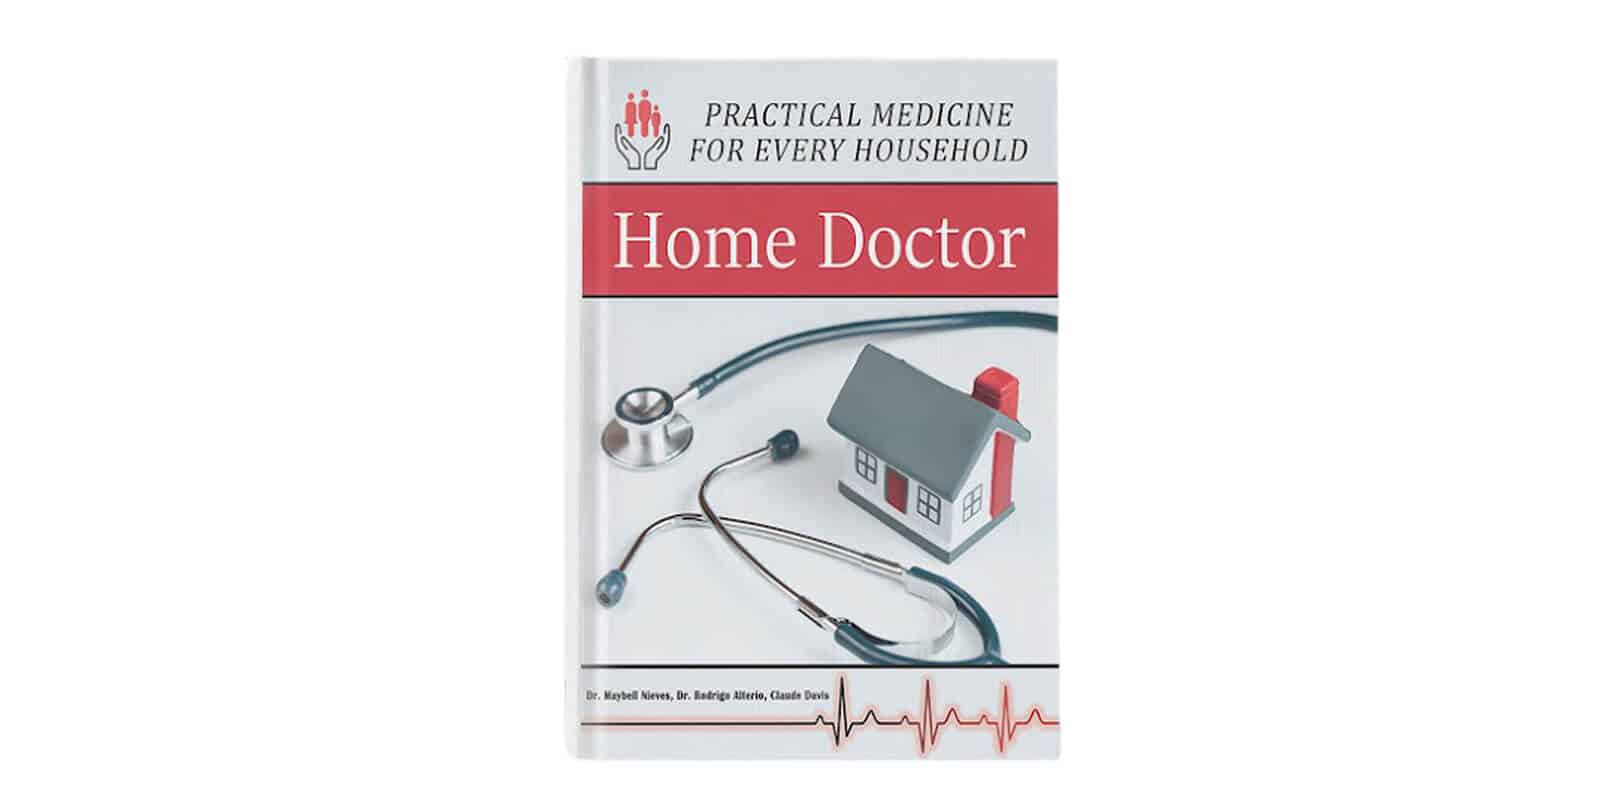 The Home Doctor Guide Reviews - Is This Home Doctor Guide Useful?